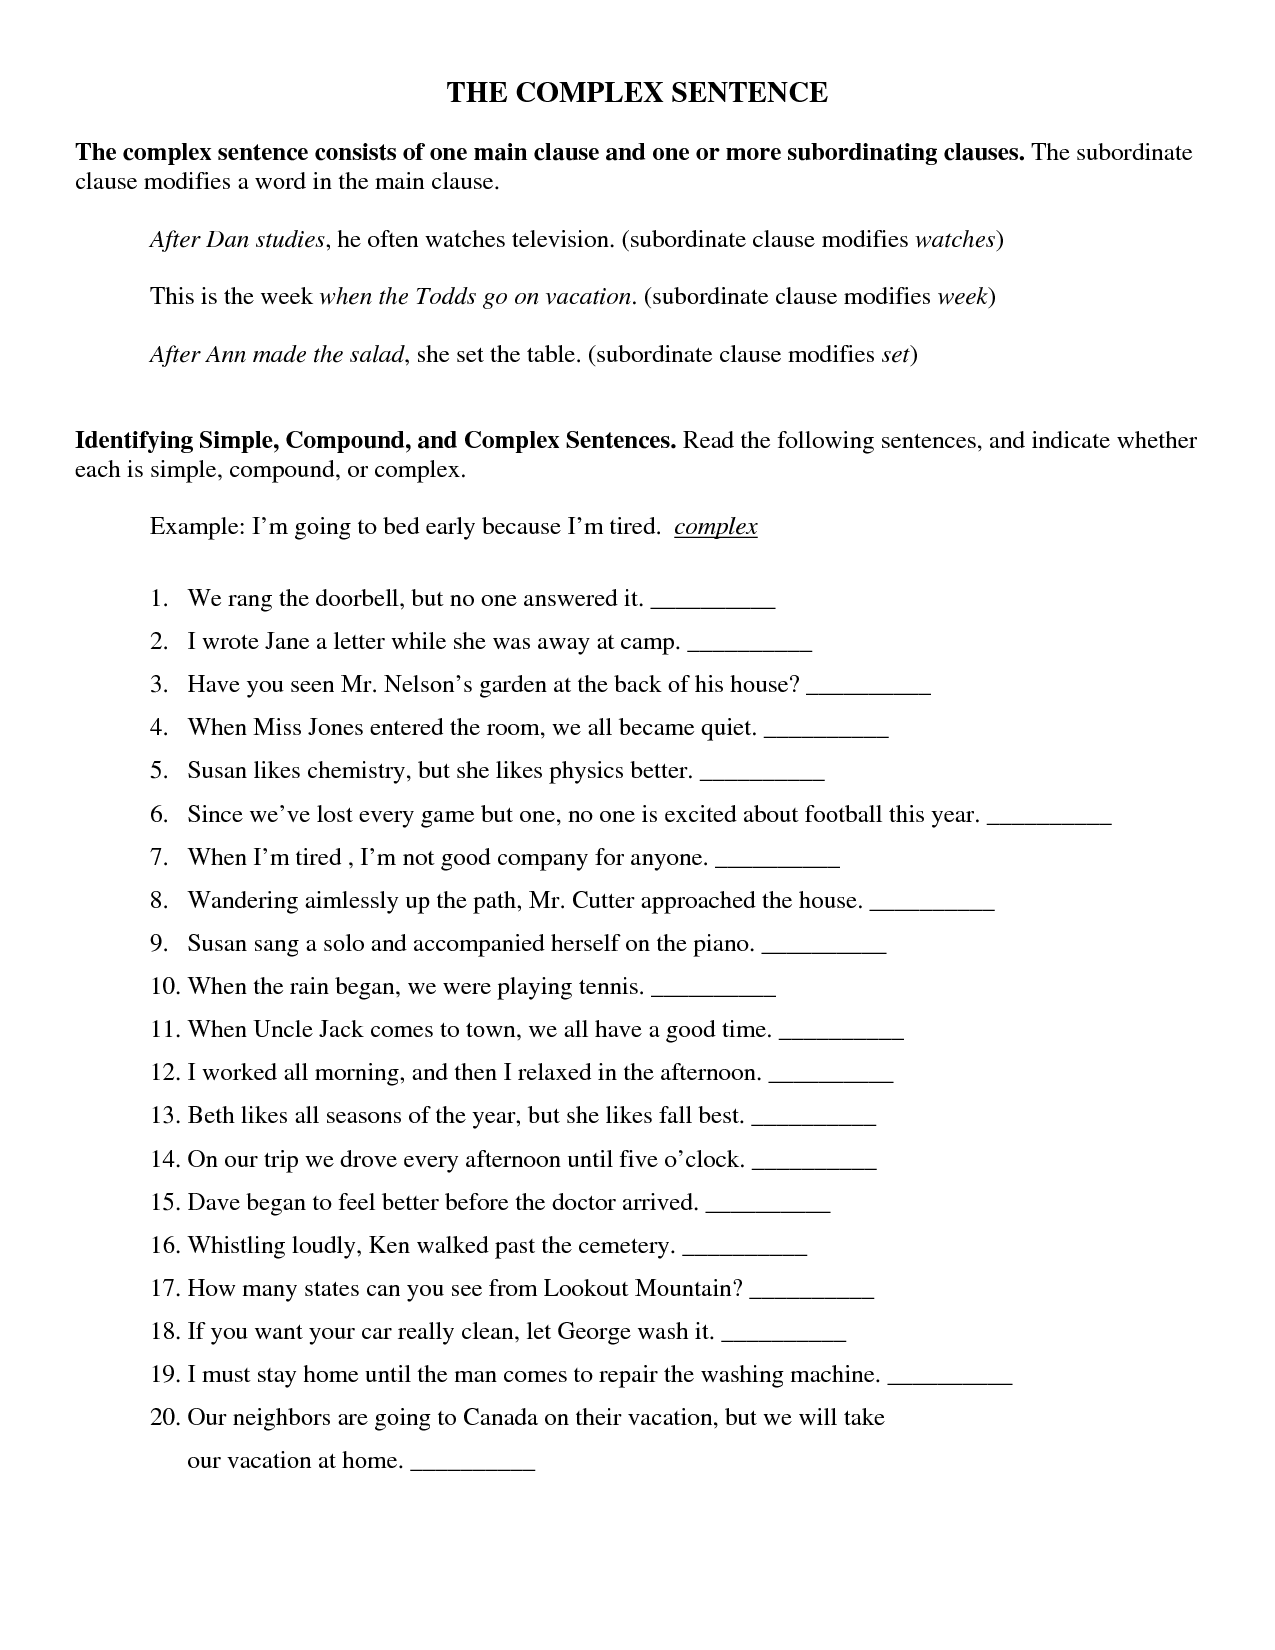 5-best-images-of-printable-worksheets-compound-sentences-compound-sentences-worksheet